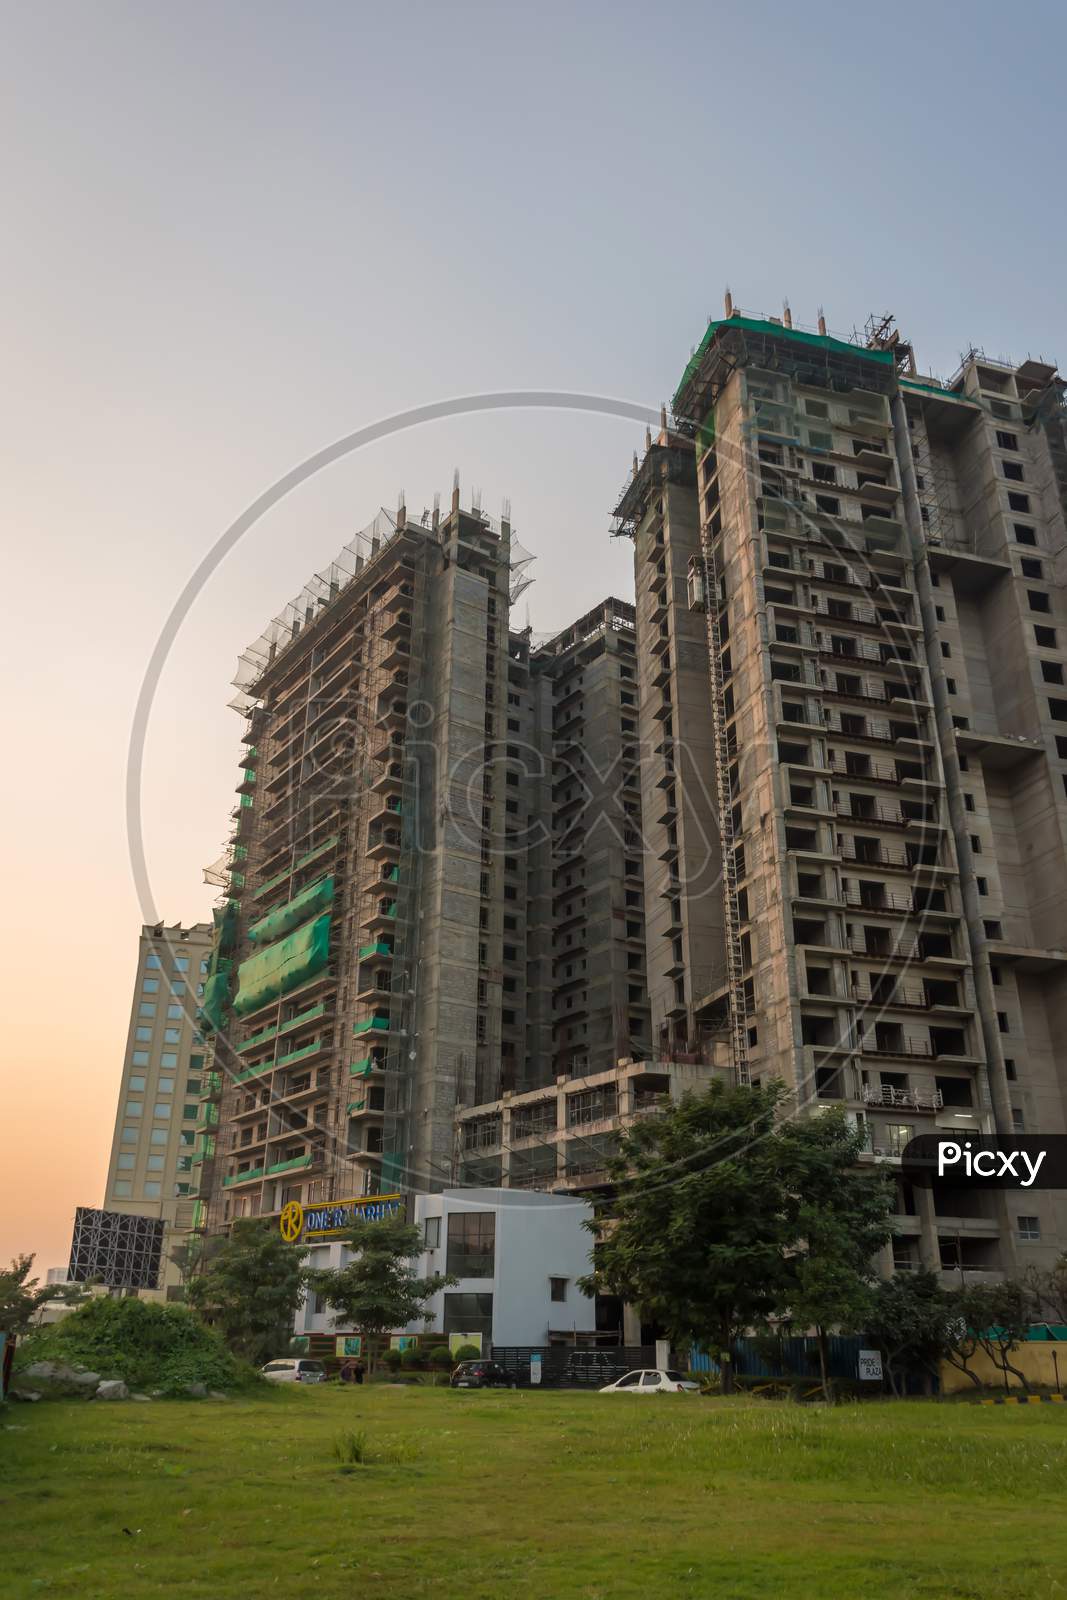 New City Residential High-Rise Building Complex With Flats At Rajarhat. Newtown, India On December 2019